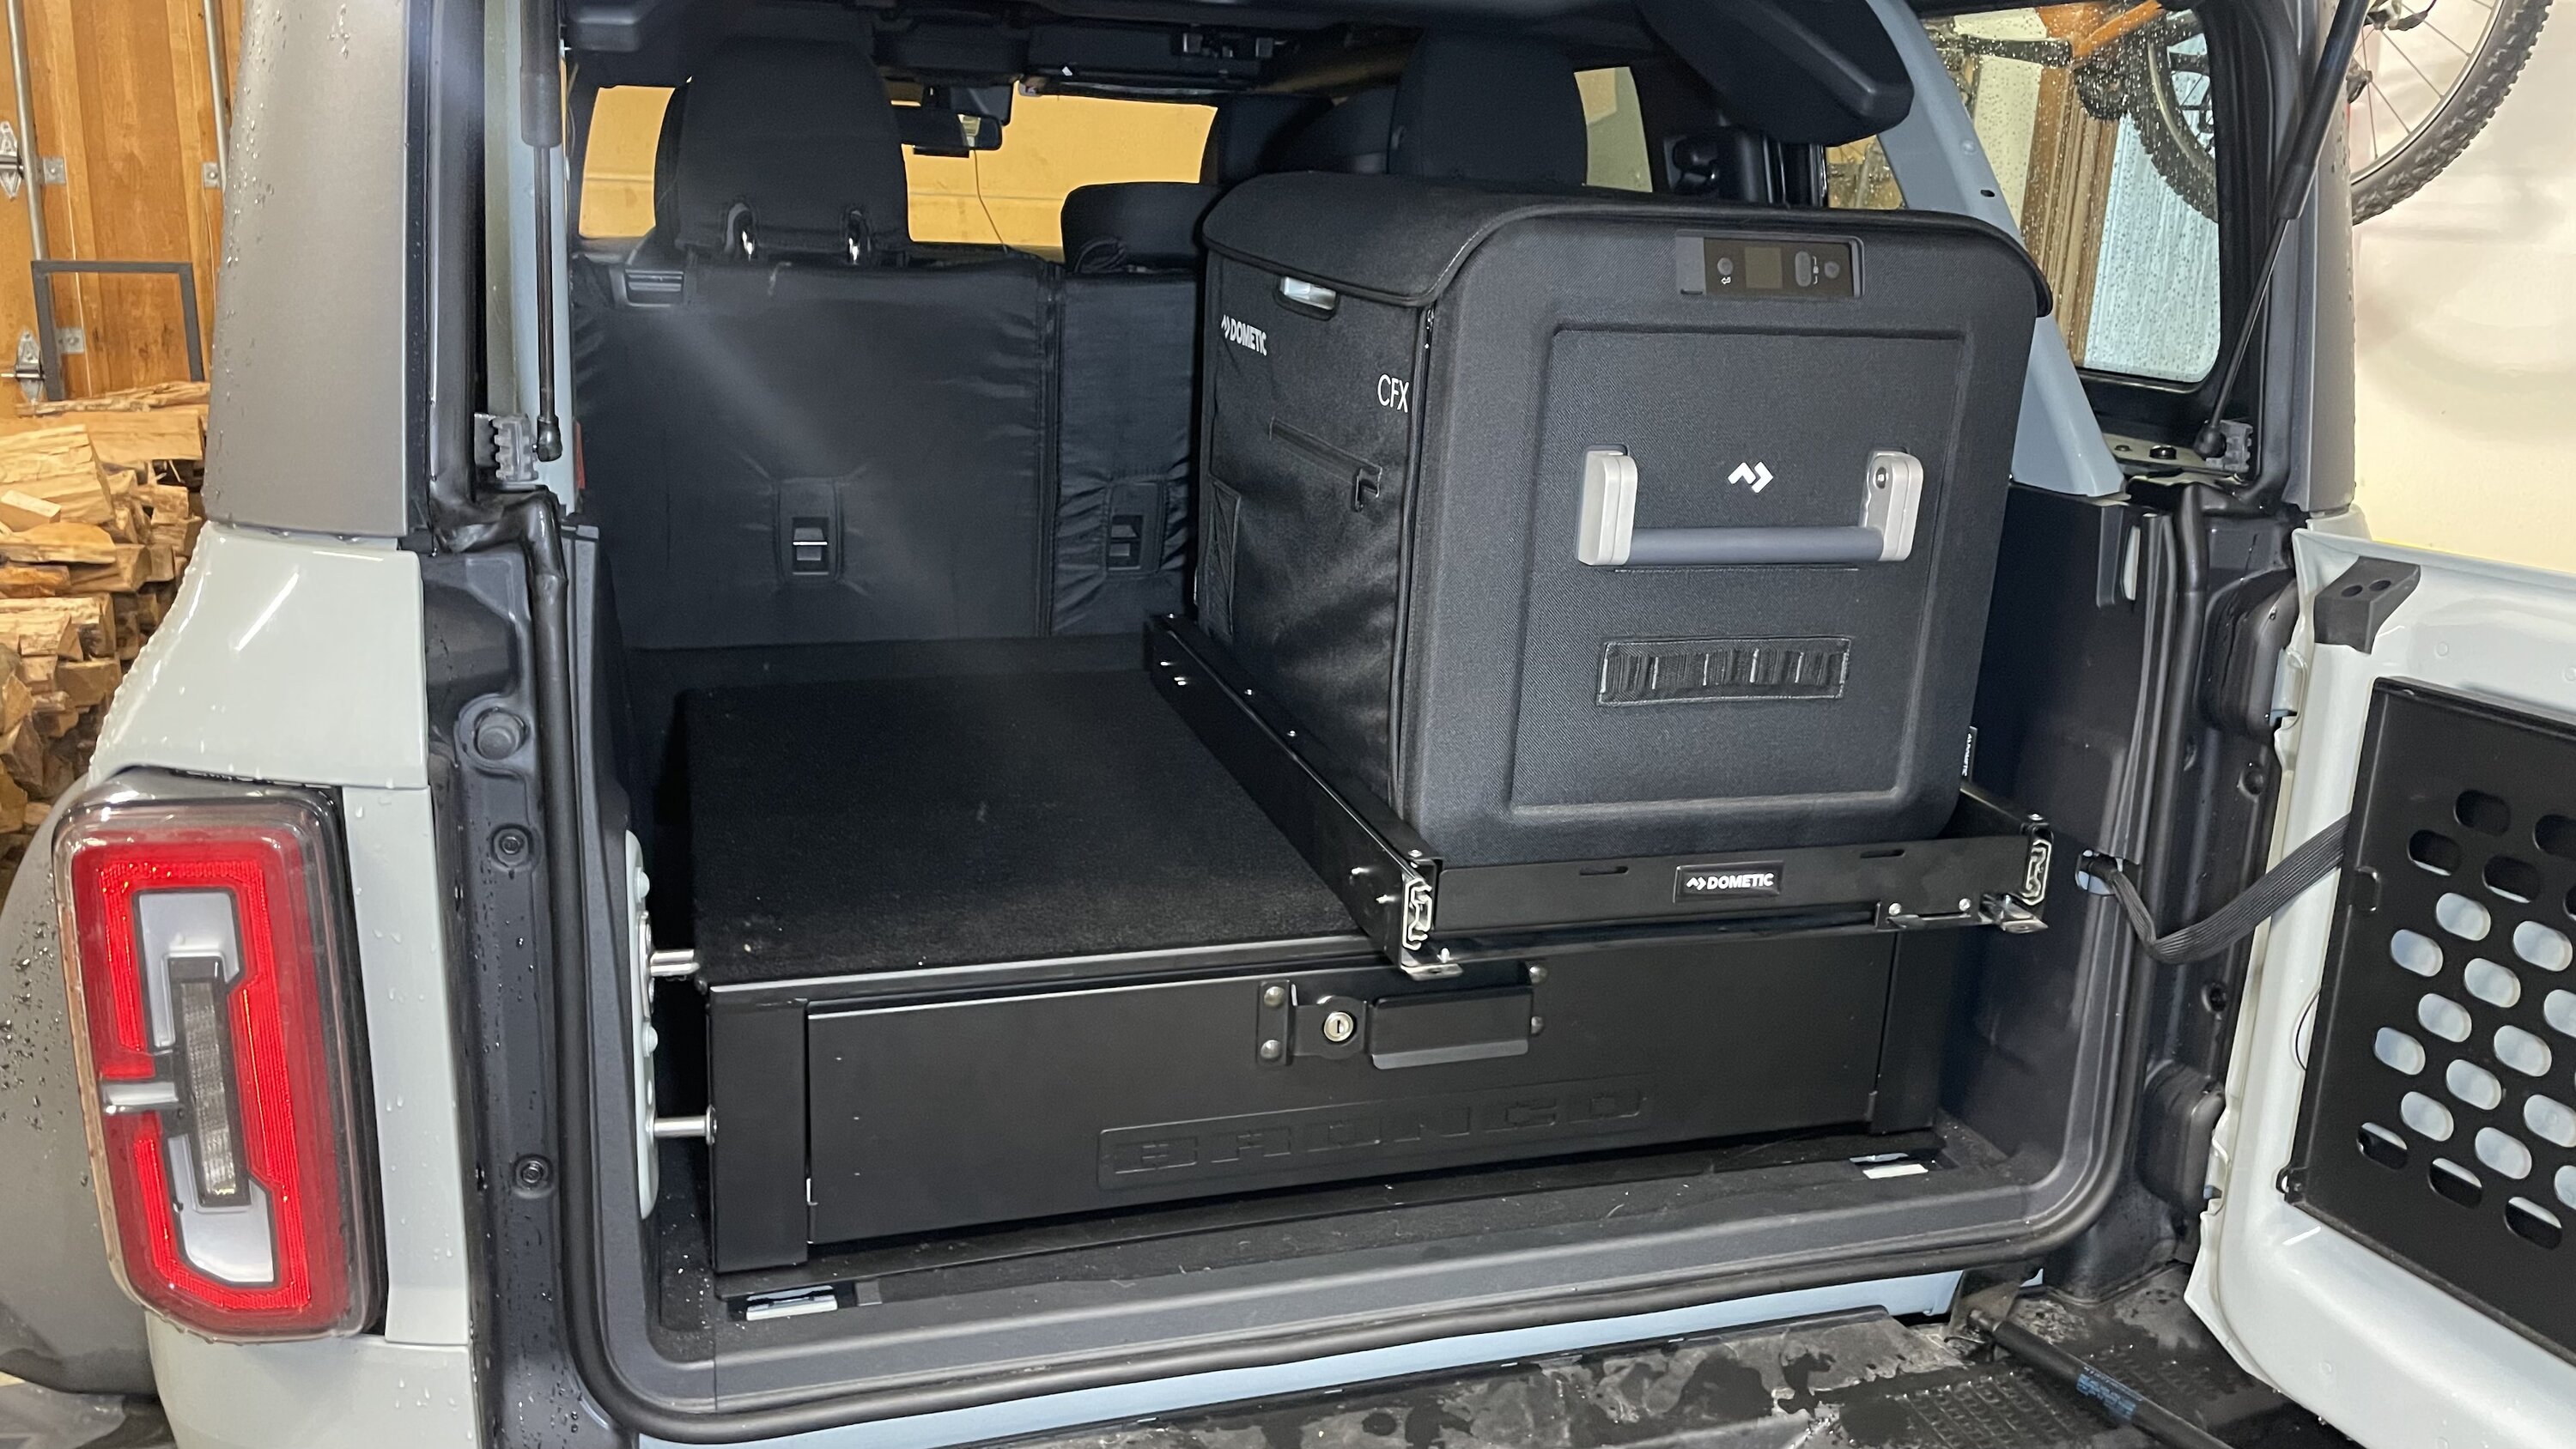 Ford Bronco SOLD - Ford 4Dr Cargo Area Security Drawer + Dometic Fridge Slide $600 OBO IMG_3558